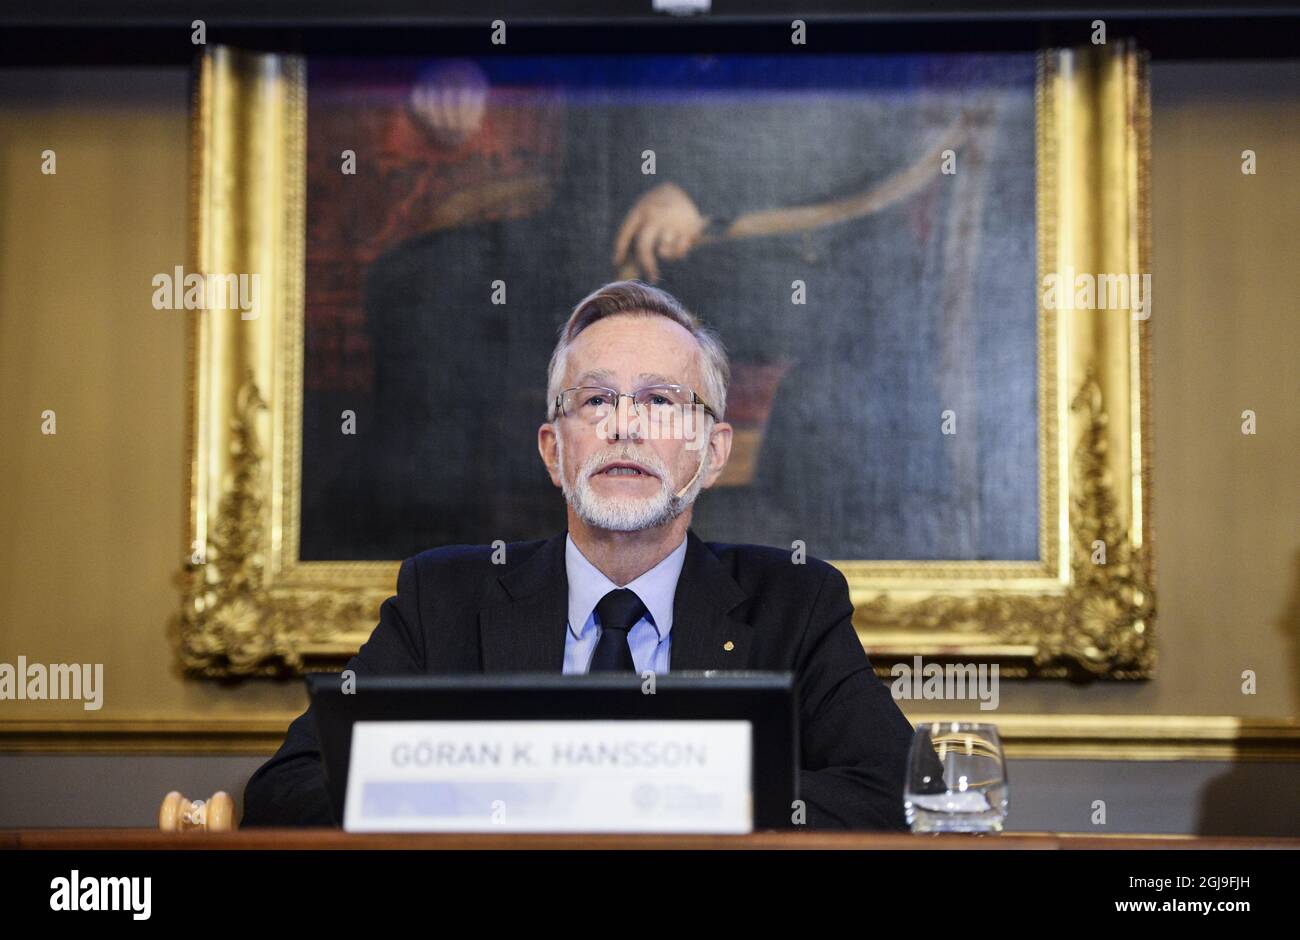 Goran K. Hansson, Permanent Secretary for the Royal Swedish Academy of Sciences addresses a press conference to announce the winner of the 2015 Sveriges Riksbank Prize in Economic Sciences in Memory of Alfred Nobel, Professor Angus Deaton, at the Royal Swedish Academy of Science, in Stockholm, Sweden, on Oct. 12, 2015. Photo: Maja Suslin / TT / code 10300  Stock Photo